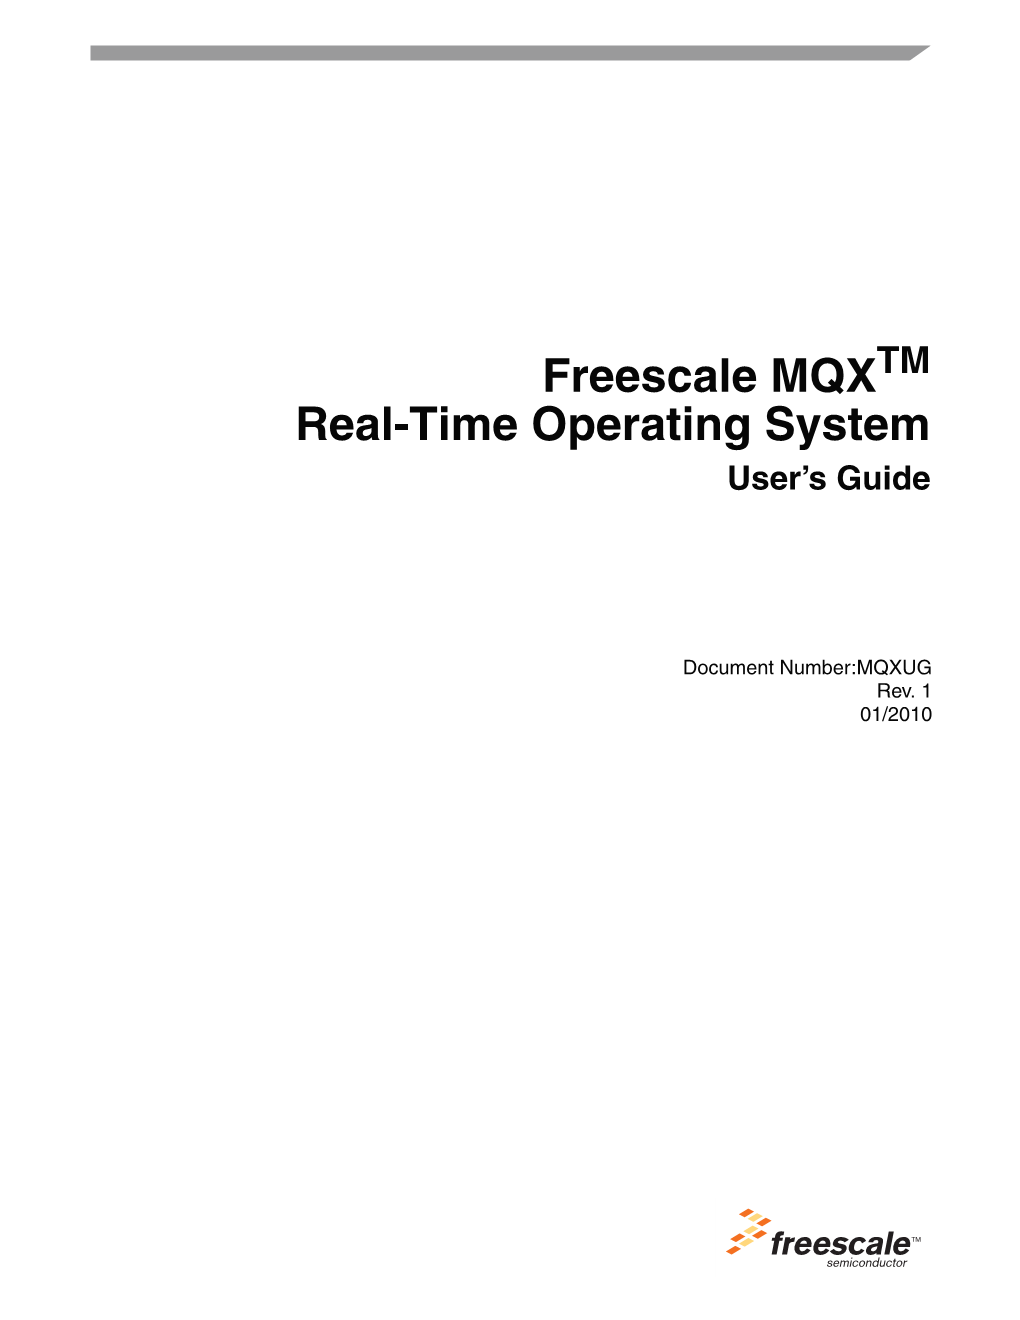 Freescale MQX Real-Time Operating System